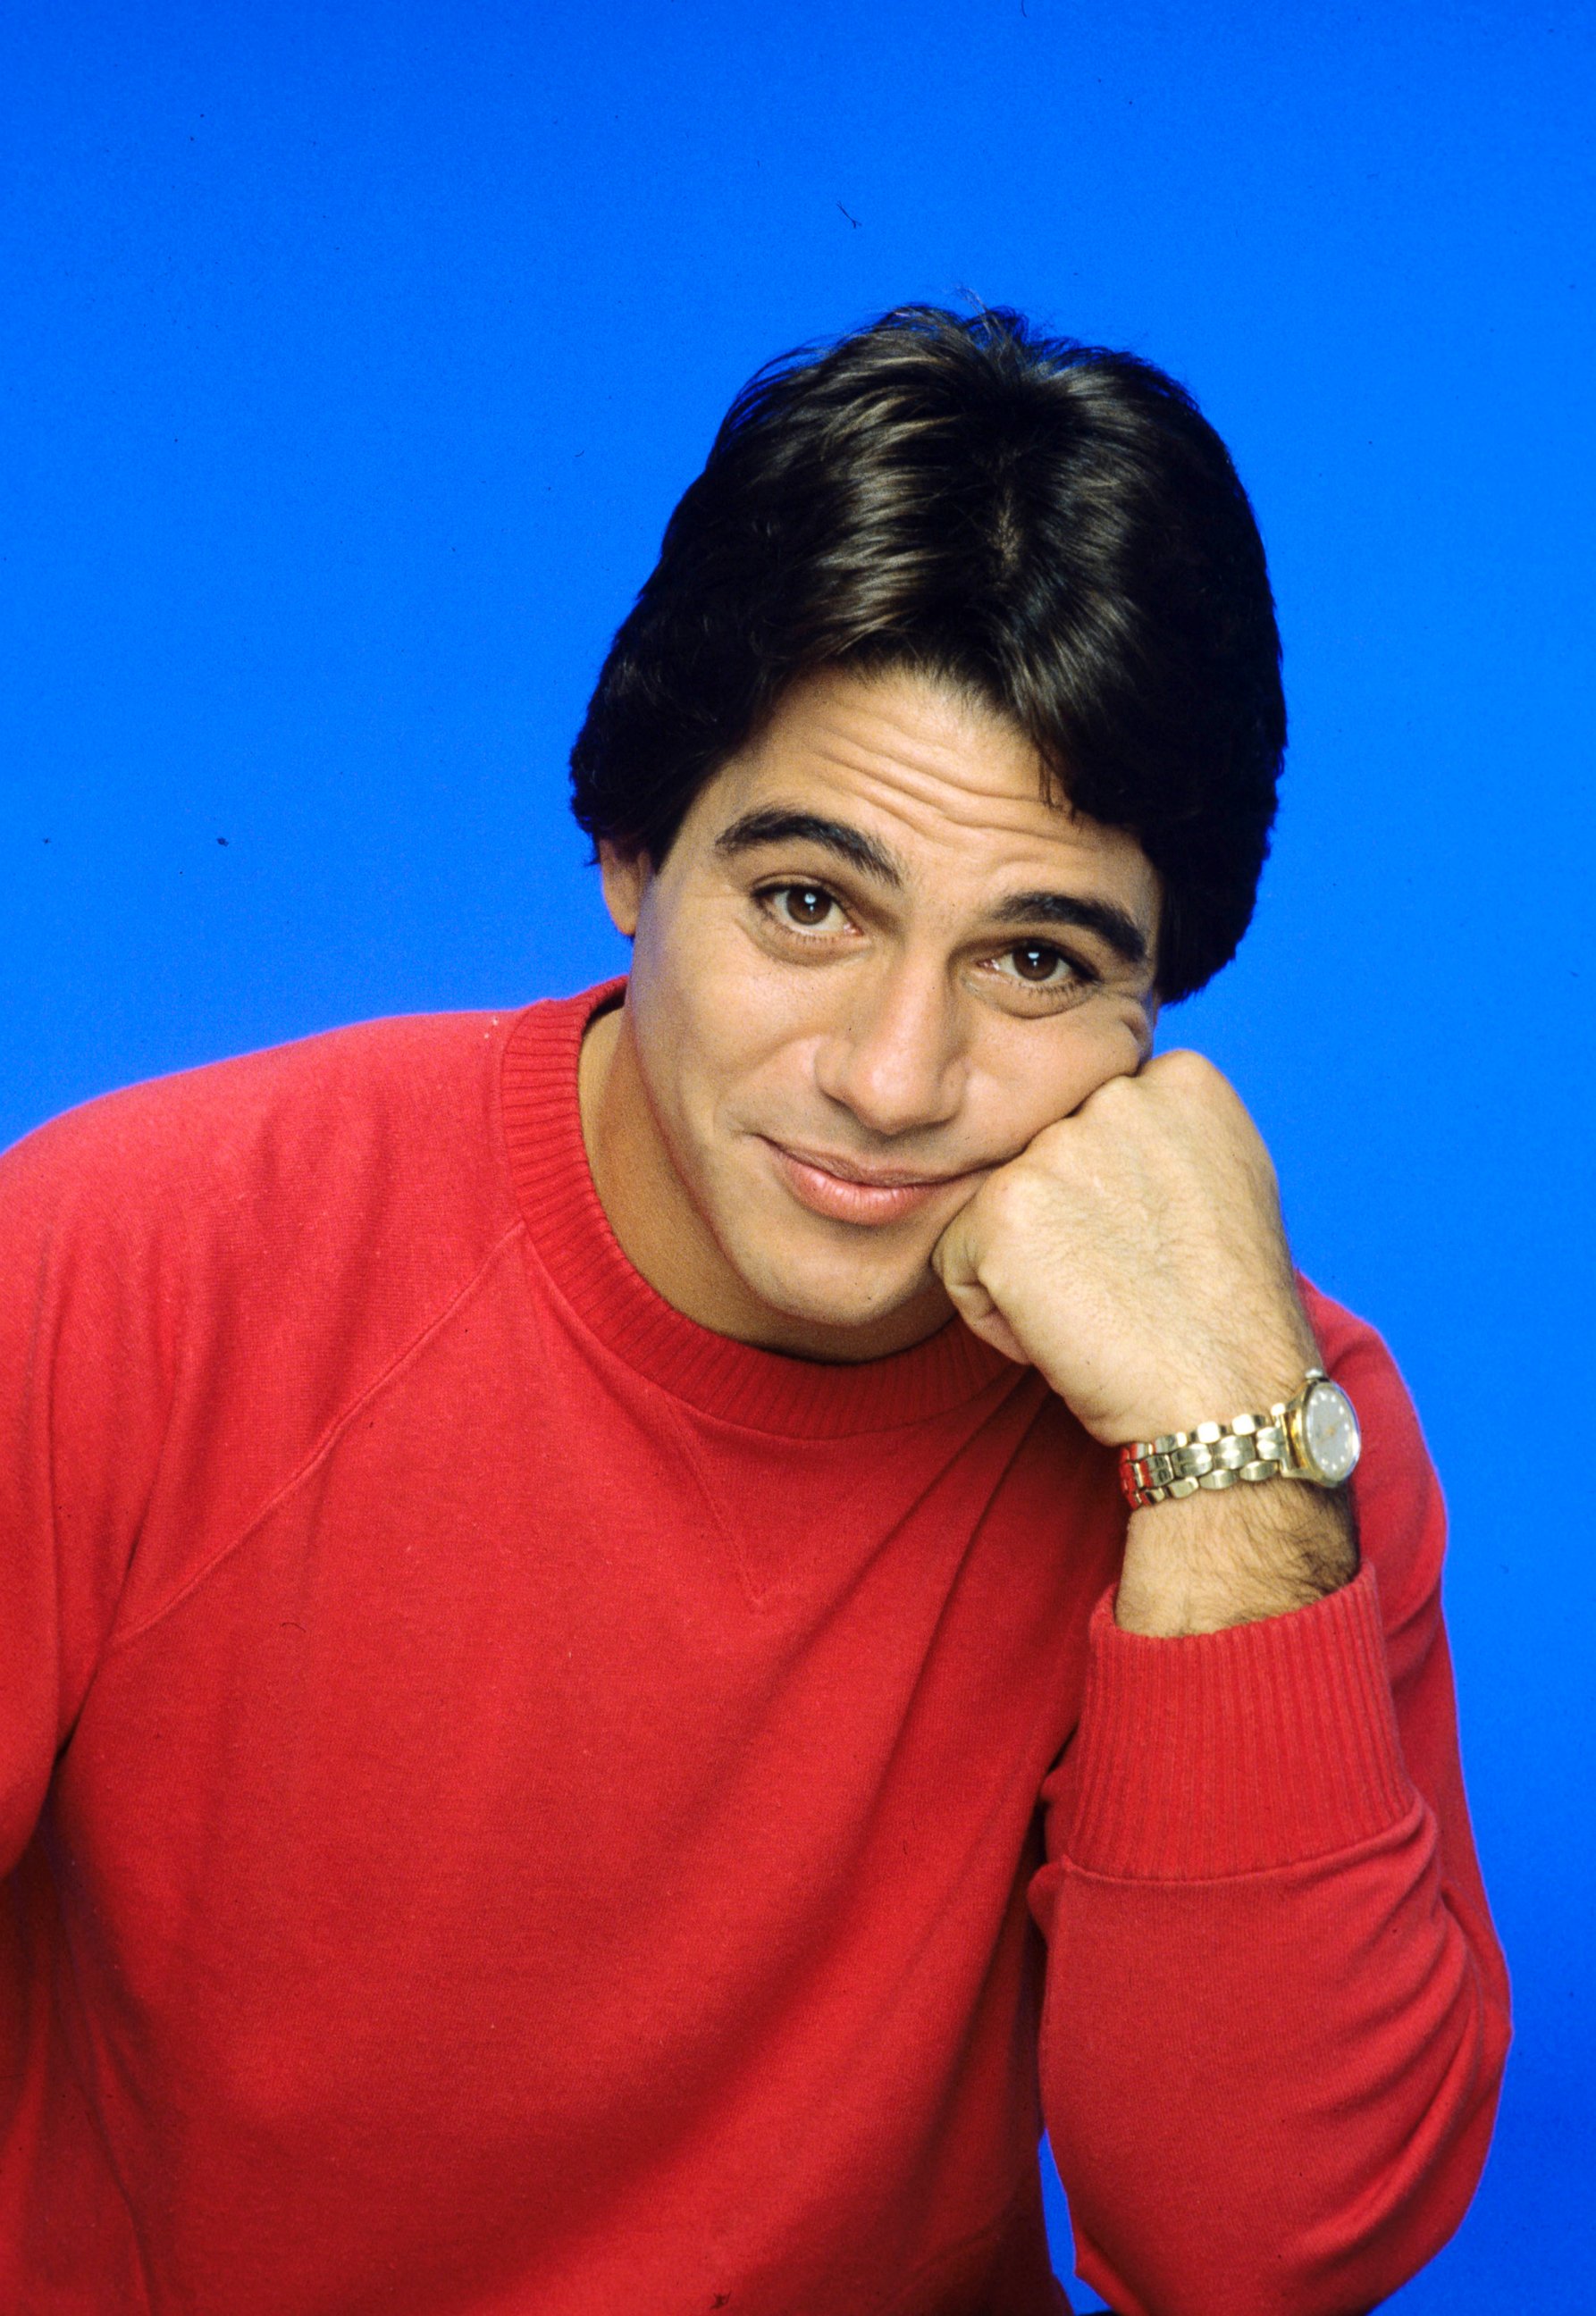 PHOTO: Former athlete Tony Micelli (Tony Danza) seeks a better life for his daughter, Samantha, by accepting the job as housekeeper for Angela Bower, an advertising executive with a young son, on the 'Who's The Boss?'